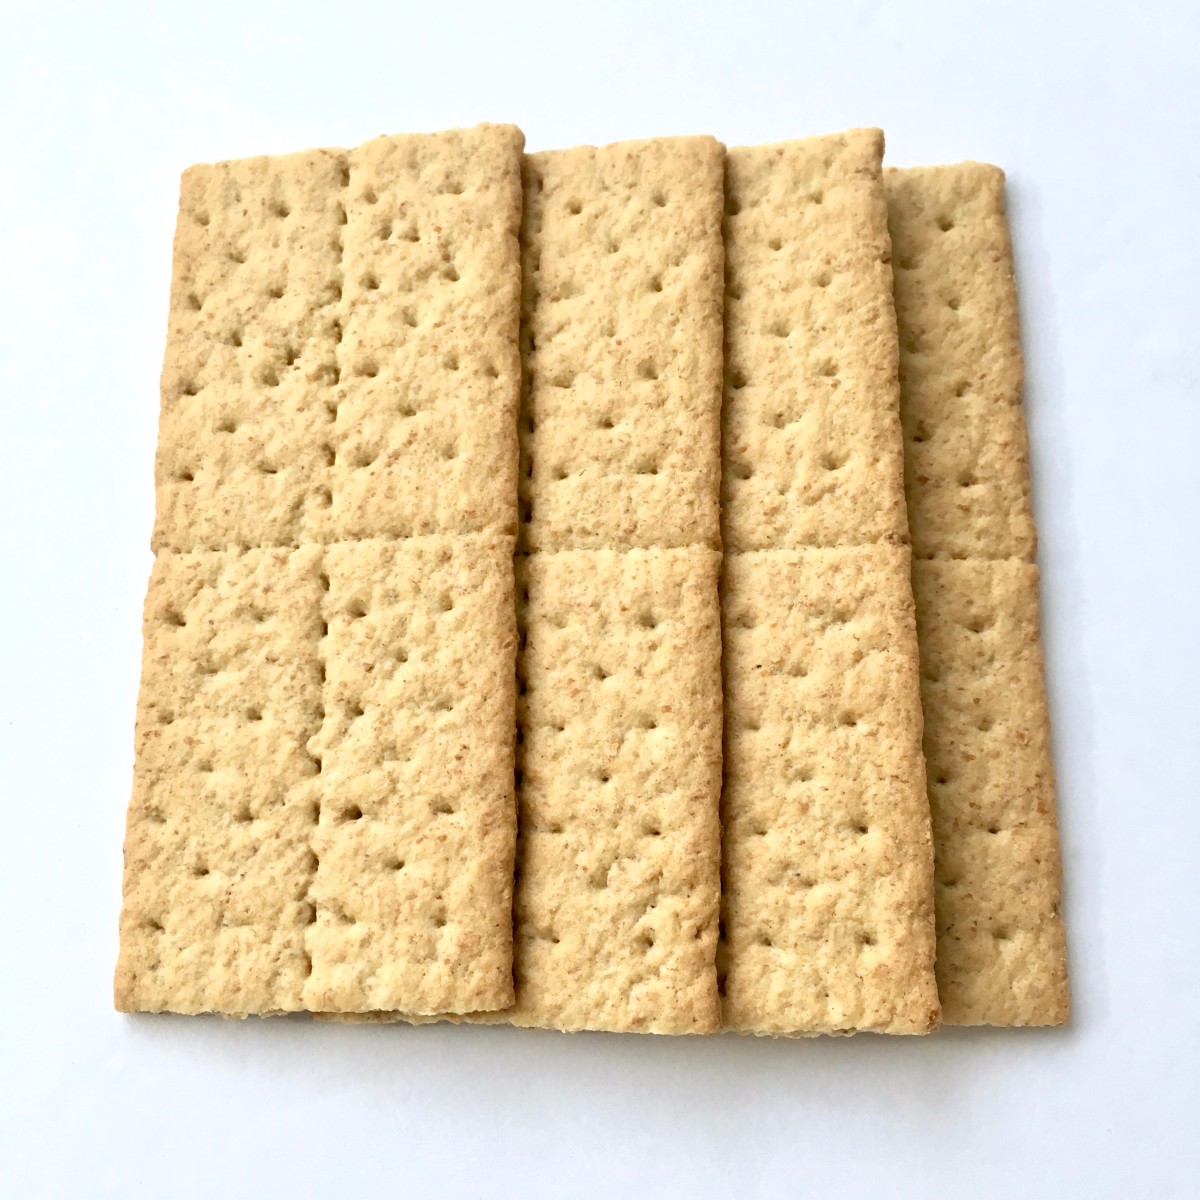 Four sheets of graham crackers